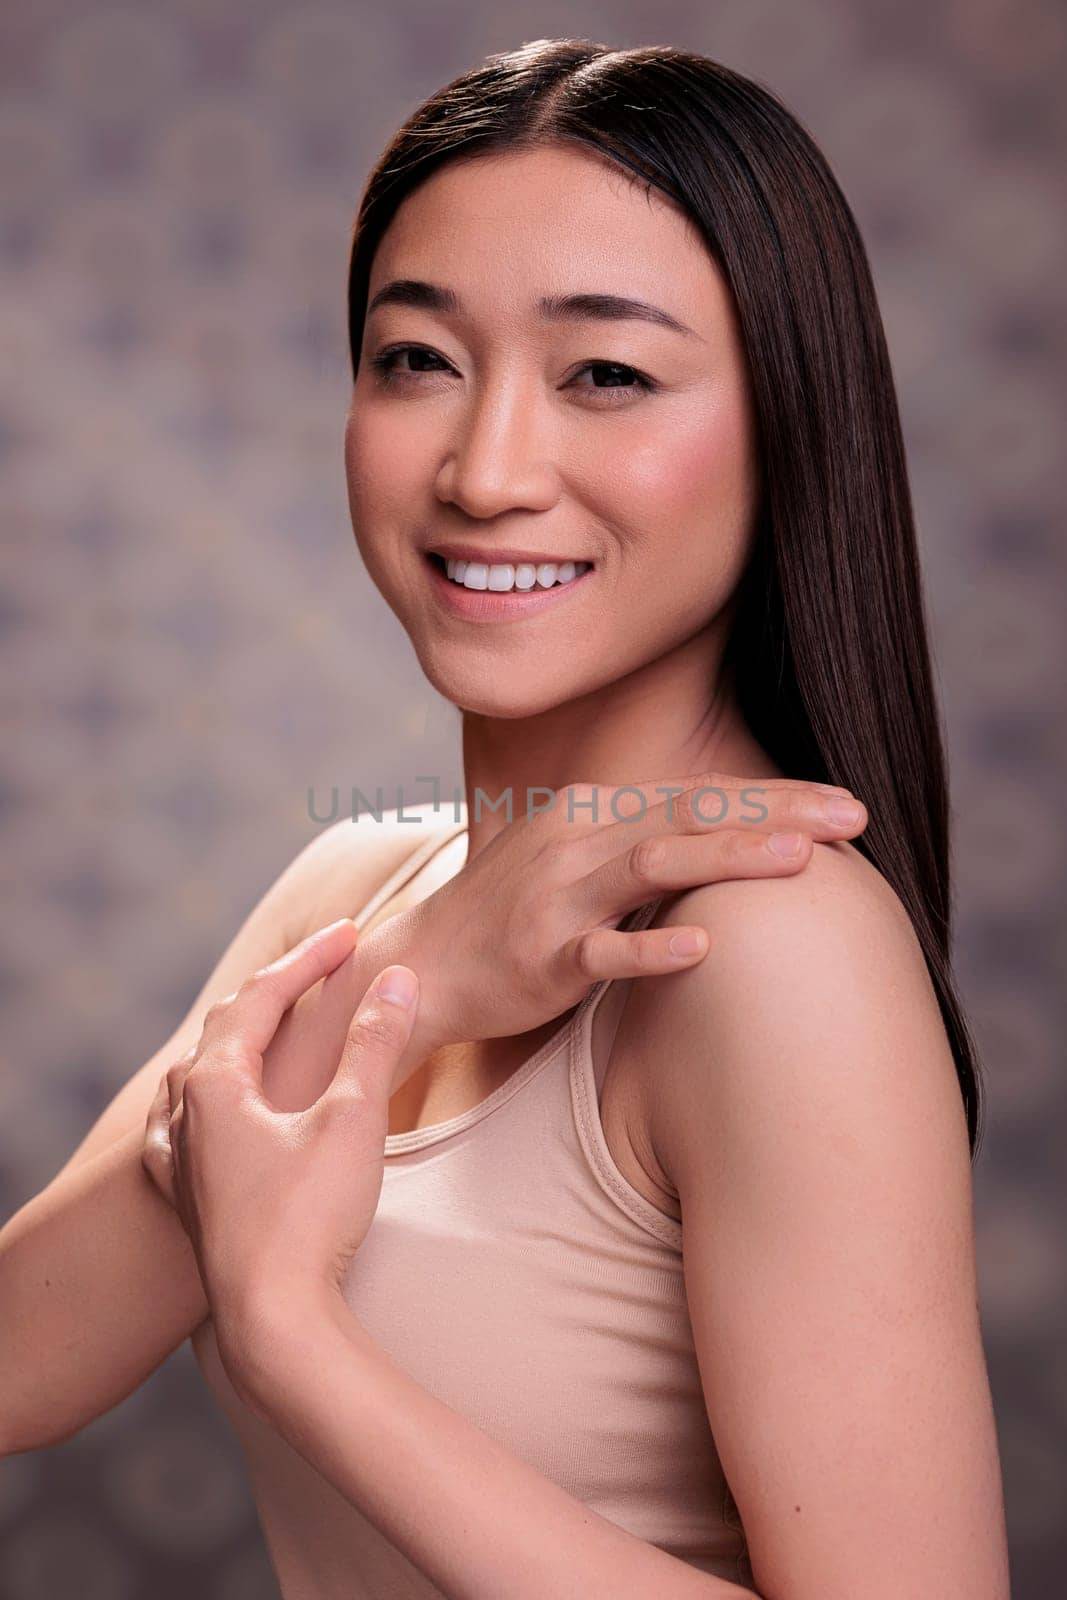 Young smiling asian woman touching shoulder and showing body care concept. Attractive woman demonstrating femininity, tenderness and natural beauty, posing for studio portrait